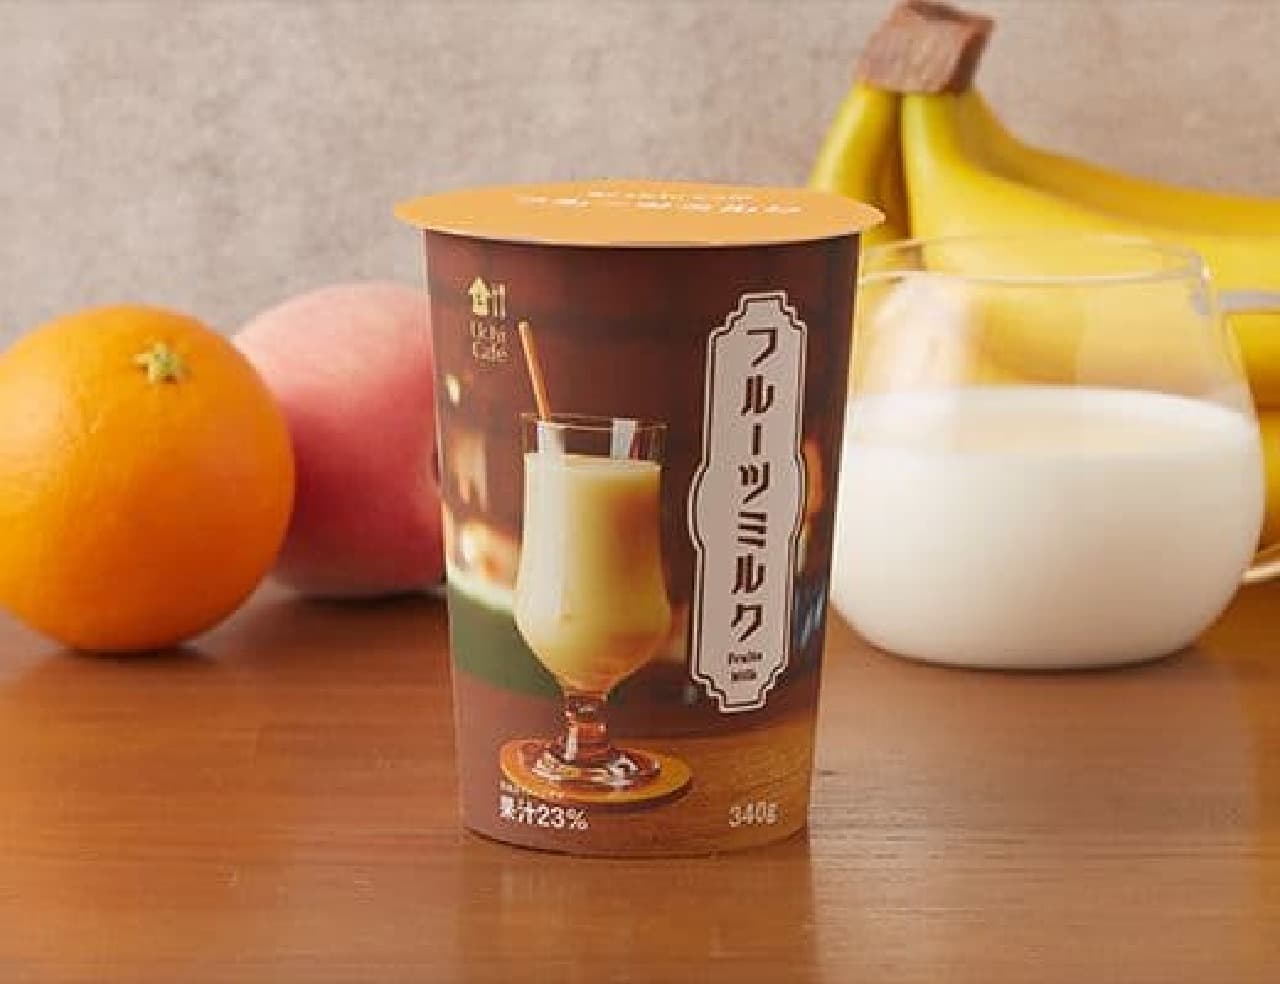 Lawson "Ouch Cafe Fruit Milk 340g